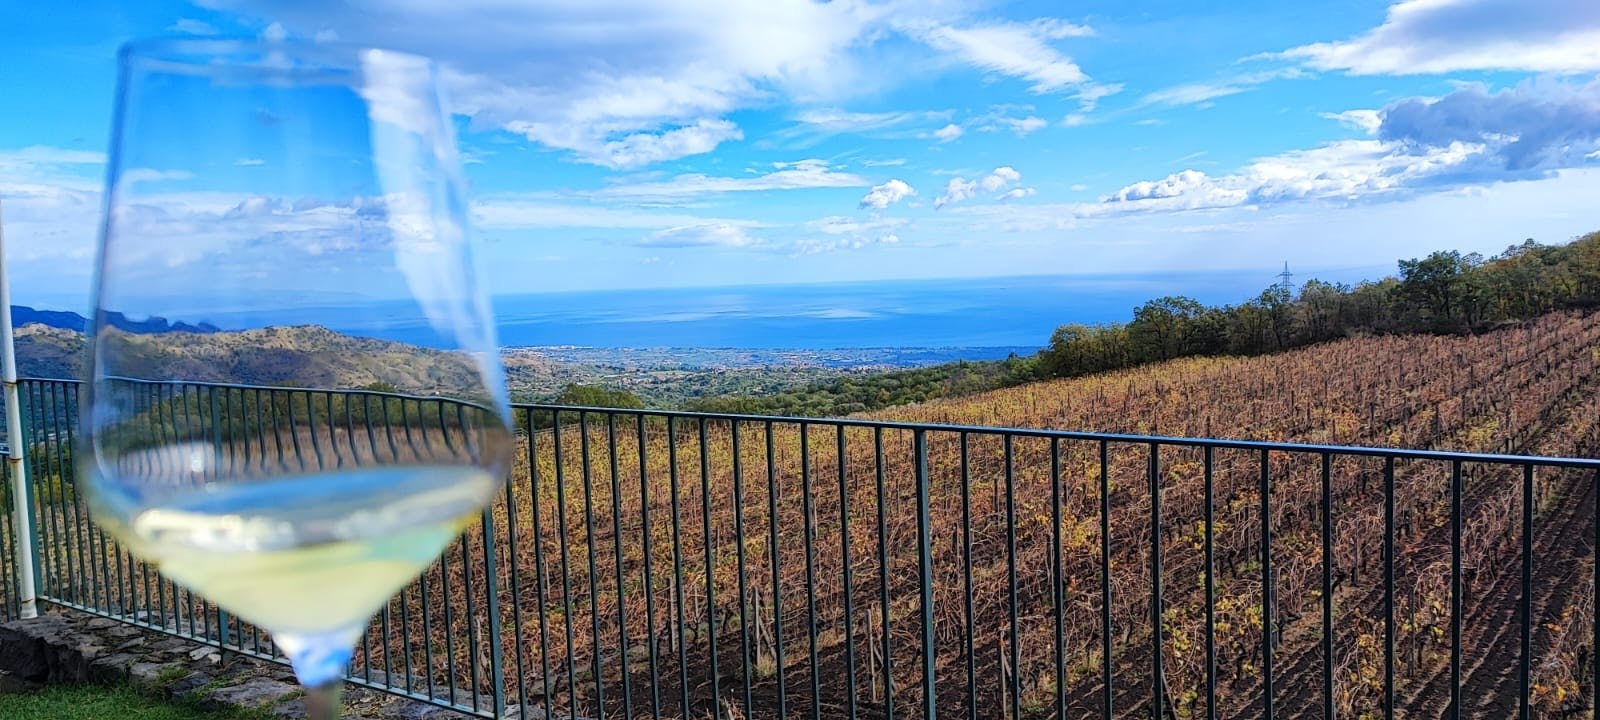 7 wines and food tasting in Etna National Park with winery tour Musement